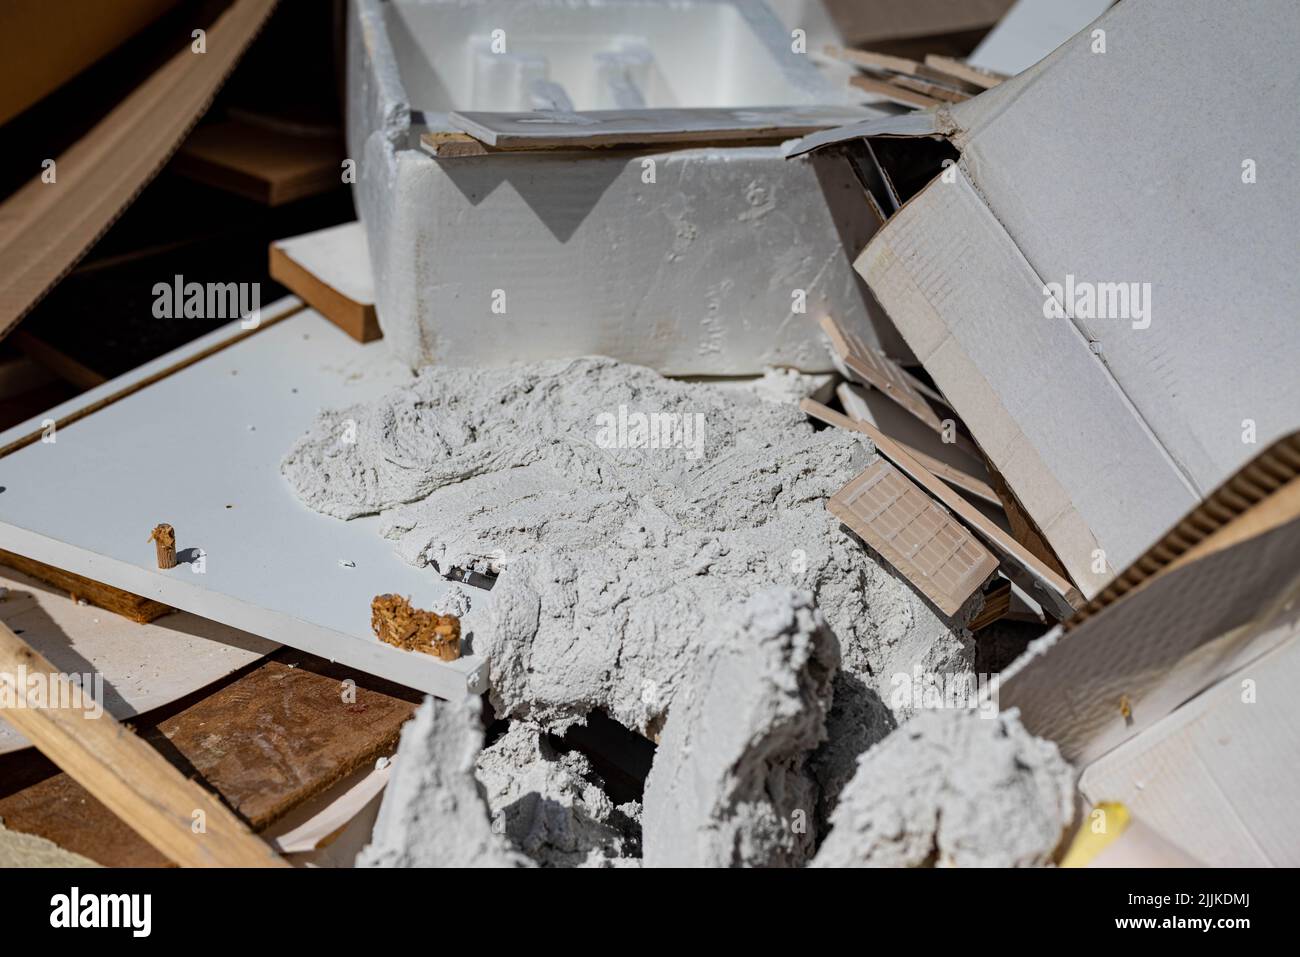 Diverse waste in a container for waste during or after a renovation. There are no trademarks or people in the shot. Stock Photo